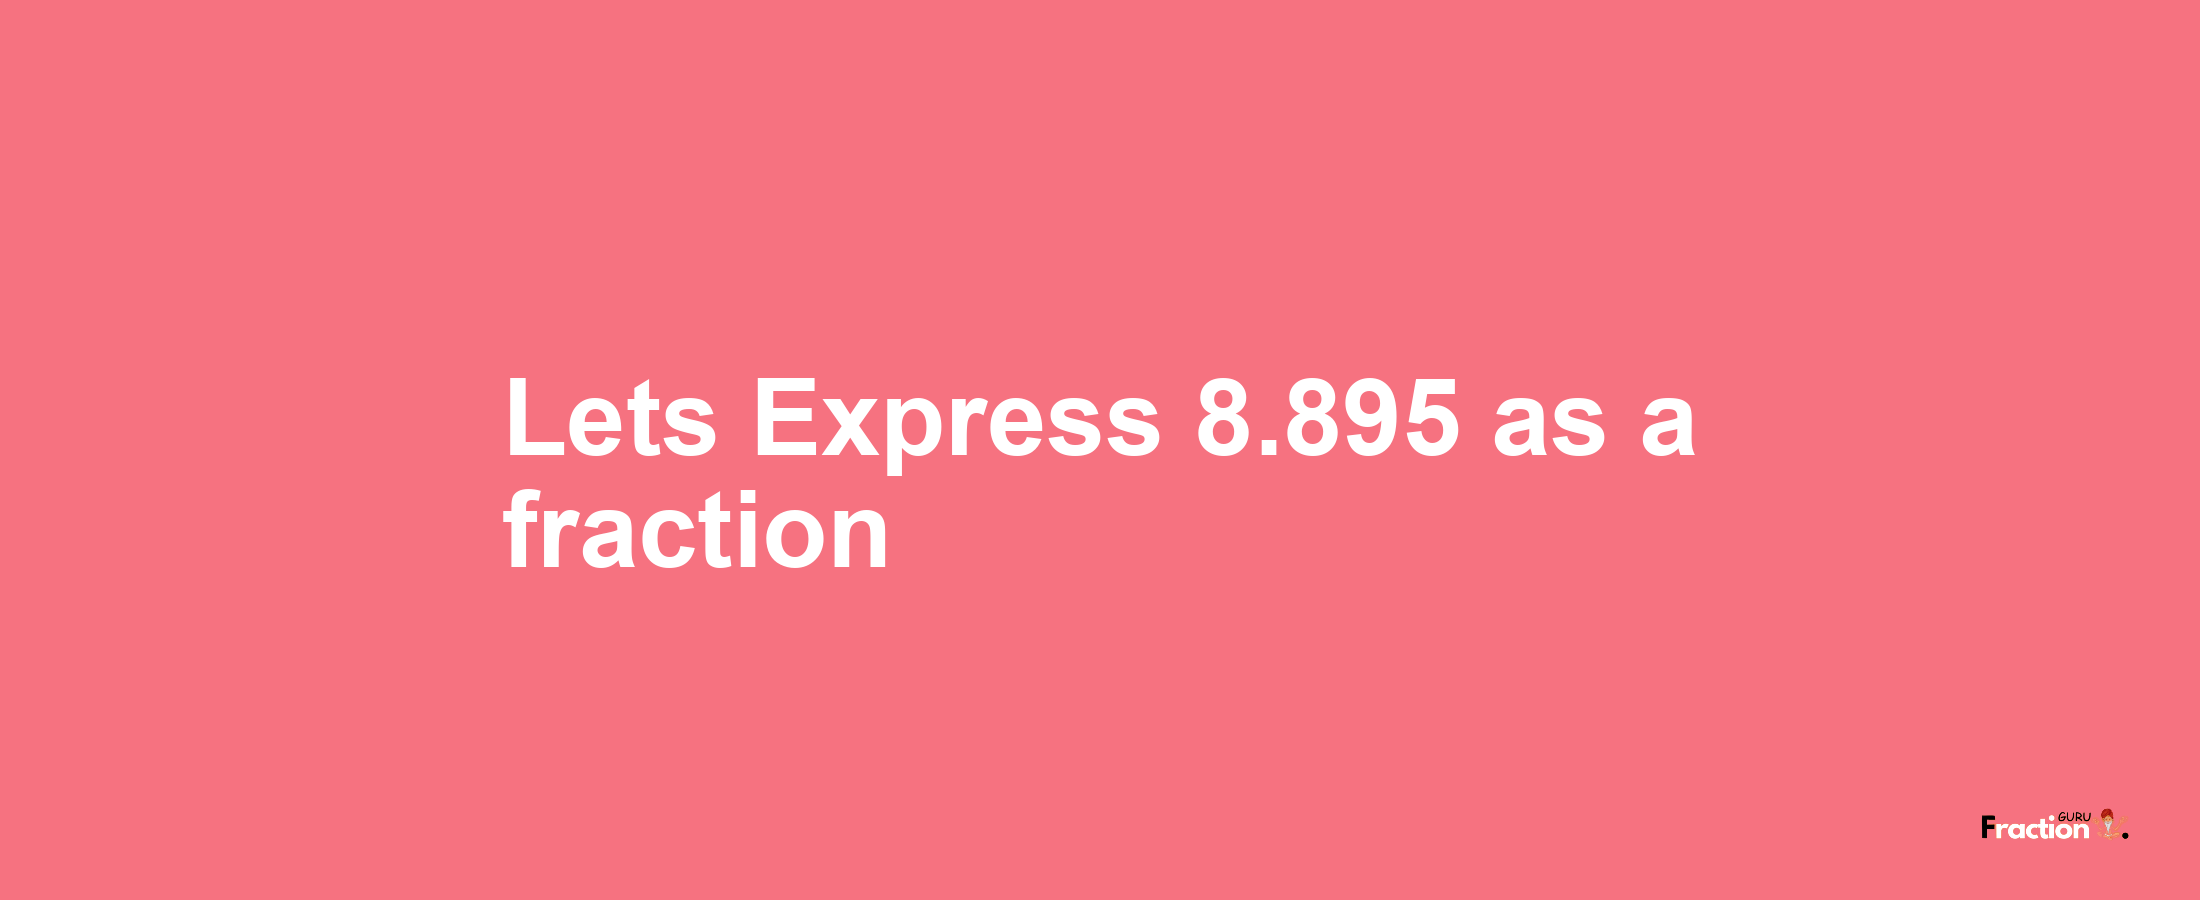 Lets Express 8.895 as afraction